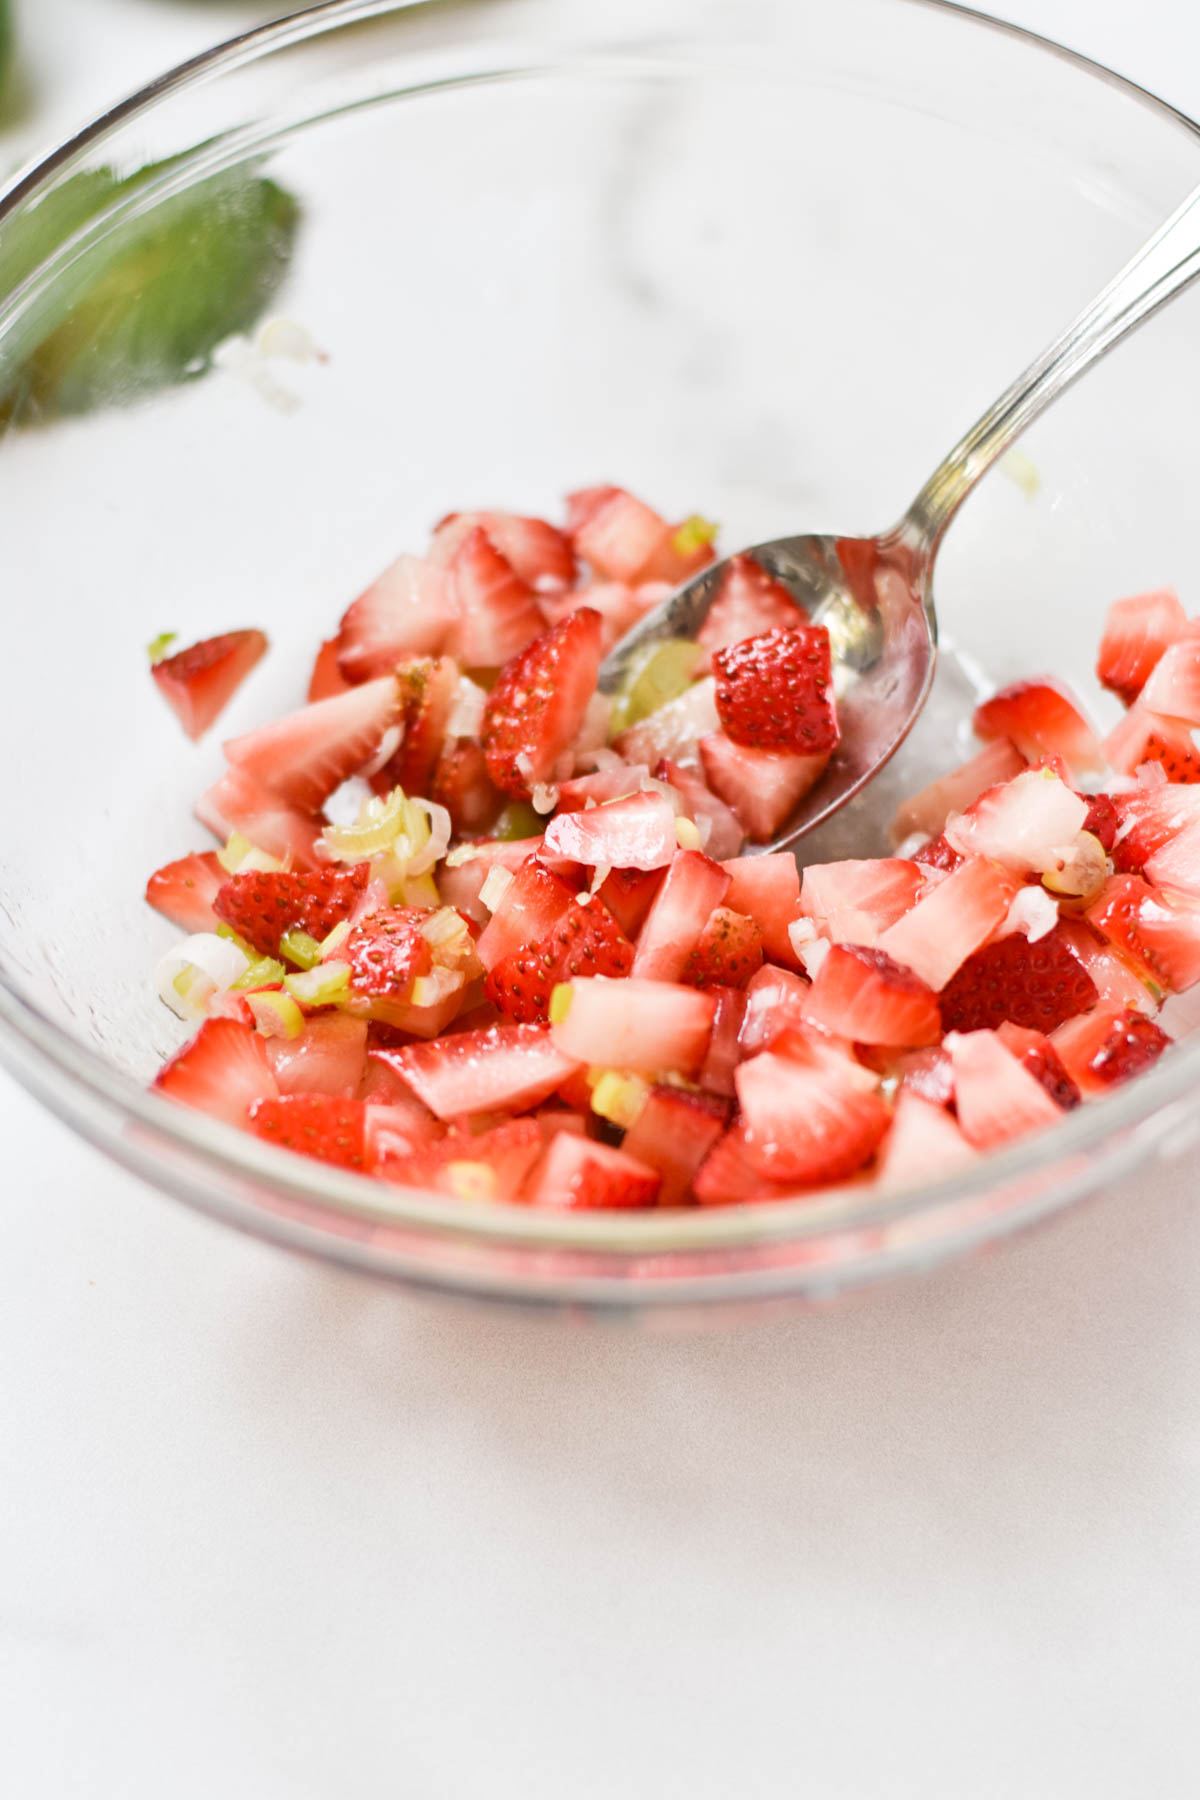 A spoon mixing strawberry relish.